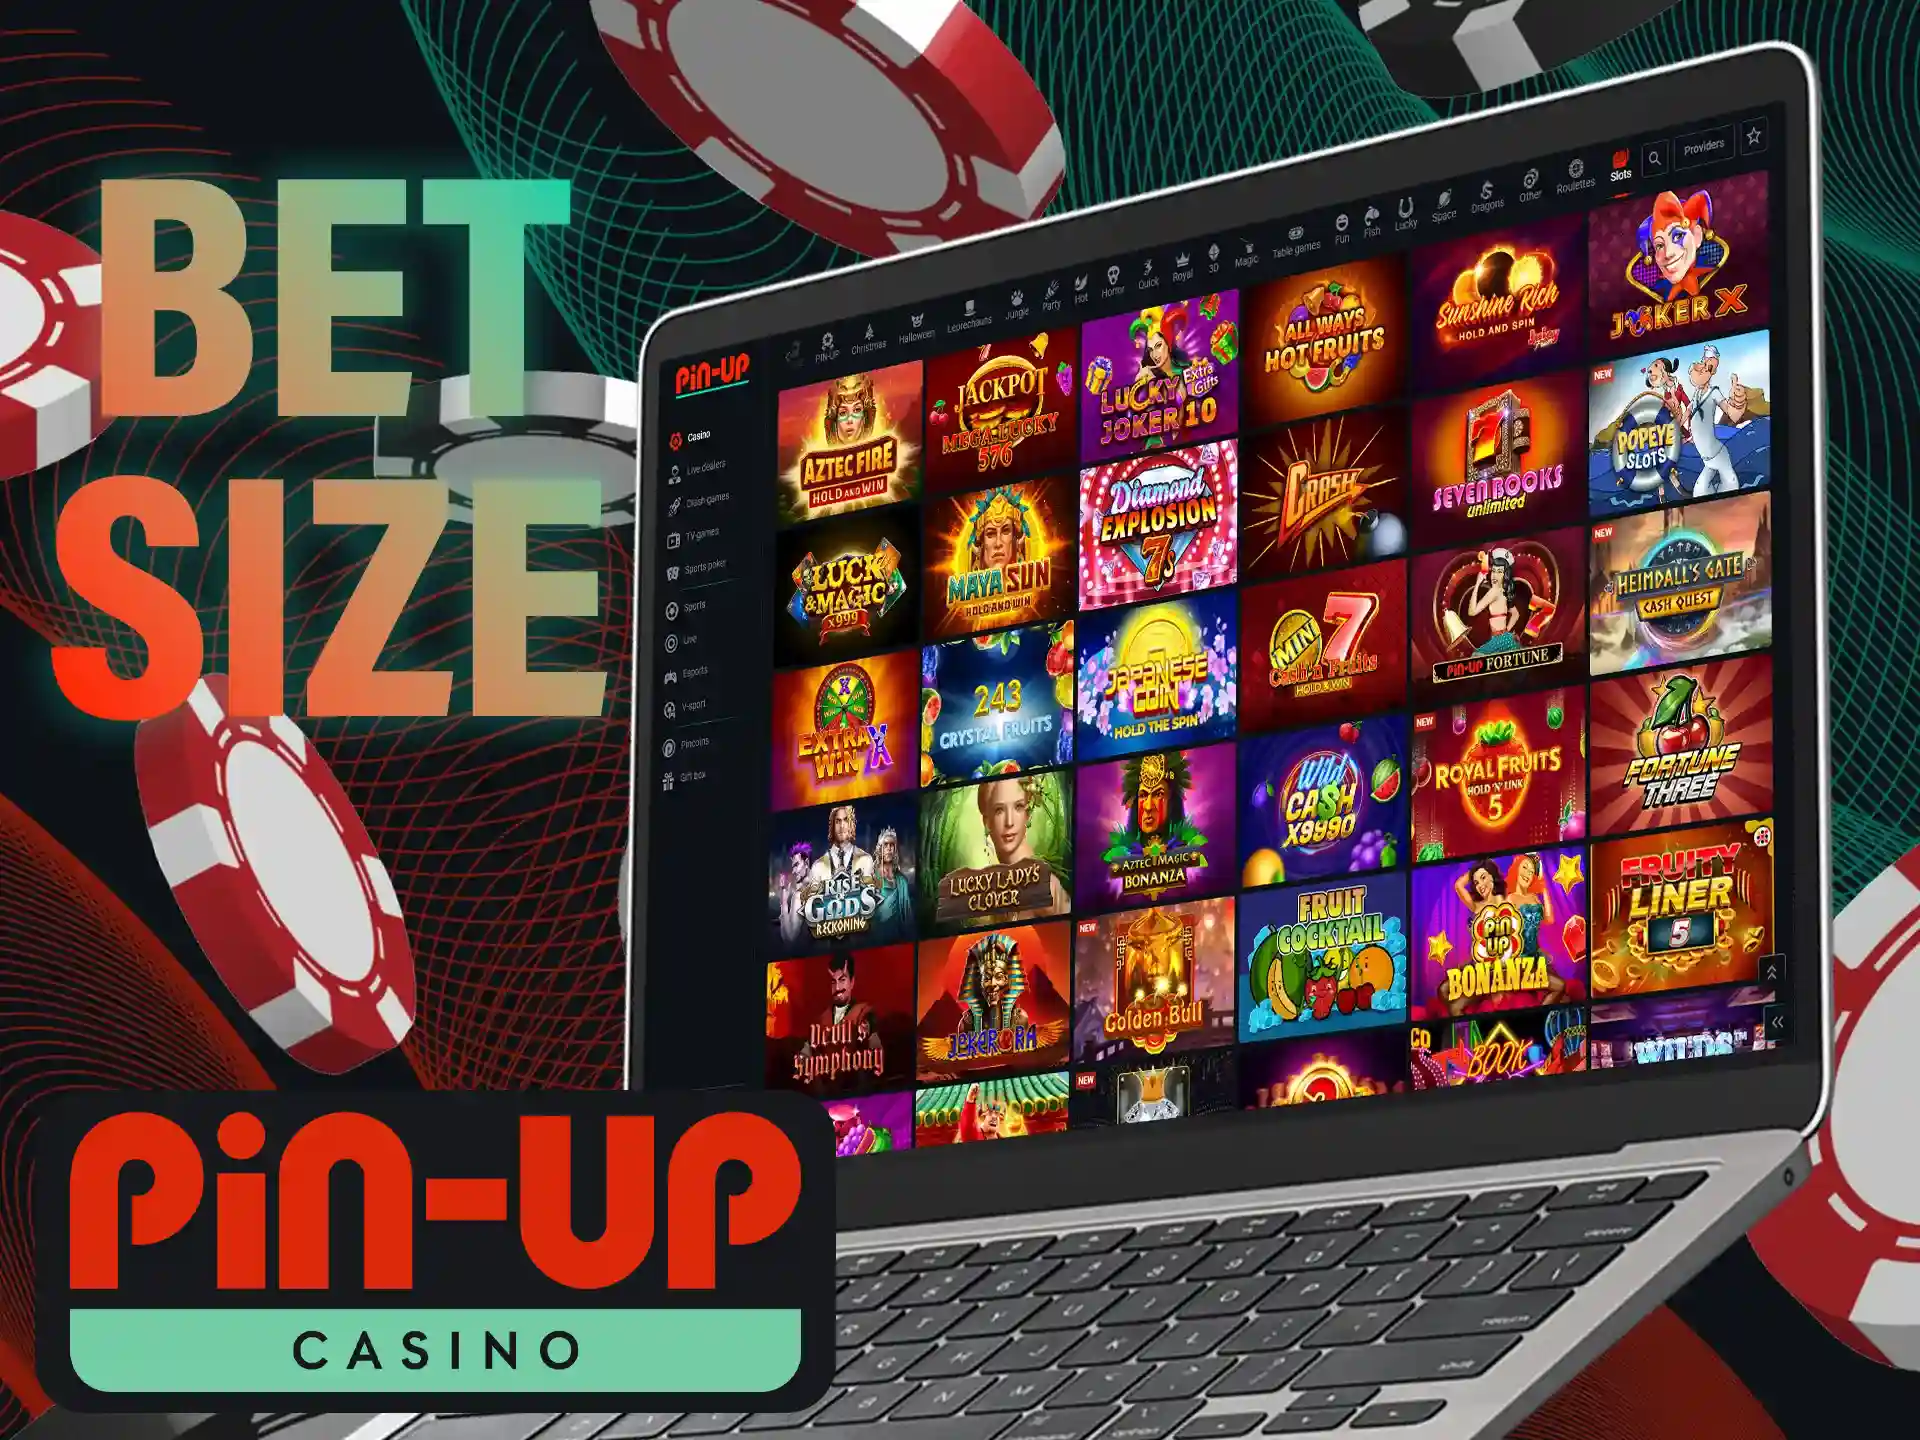 At Pin-Up Casino, the bet size is the amount you choose to wager on each spin.